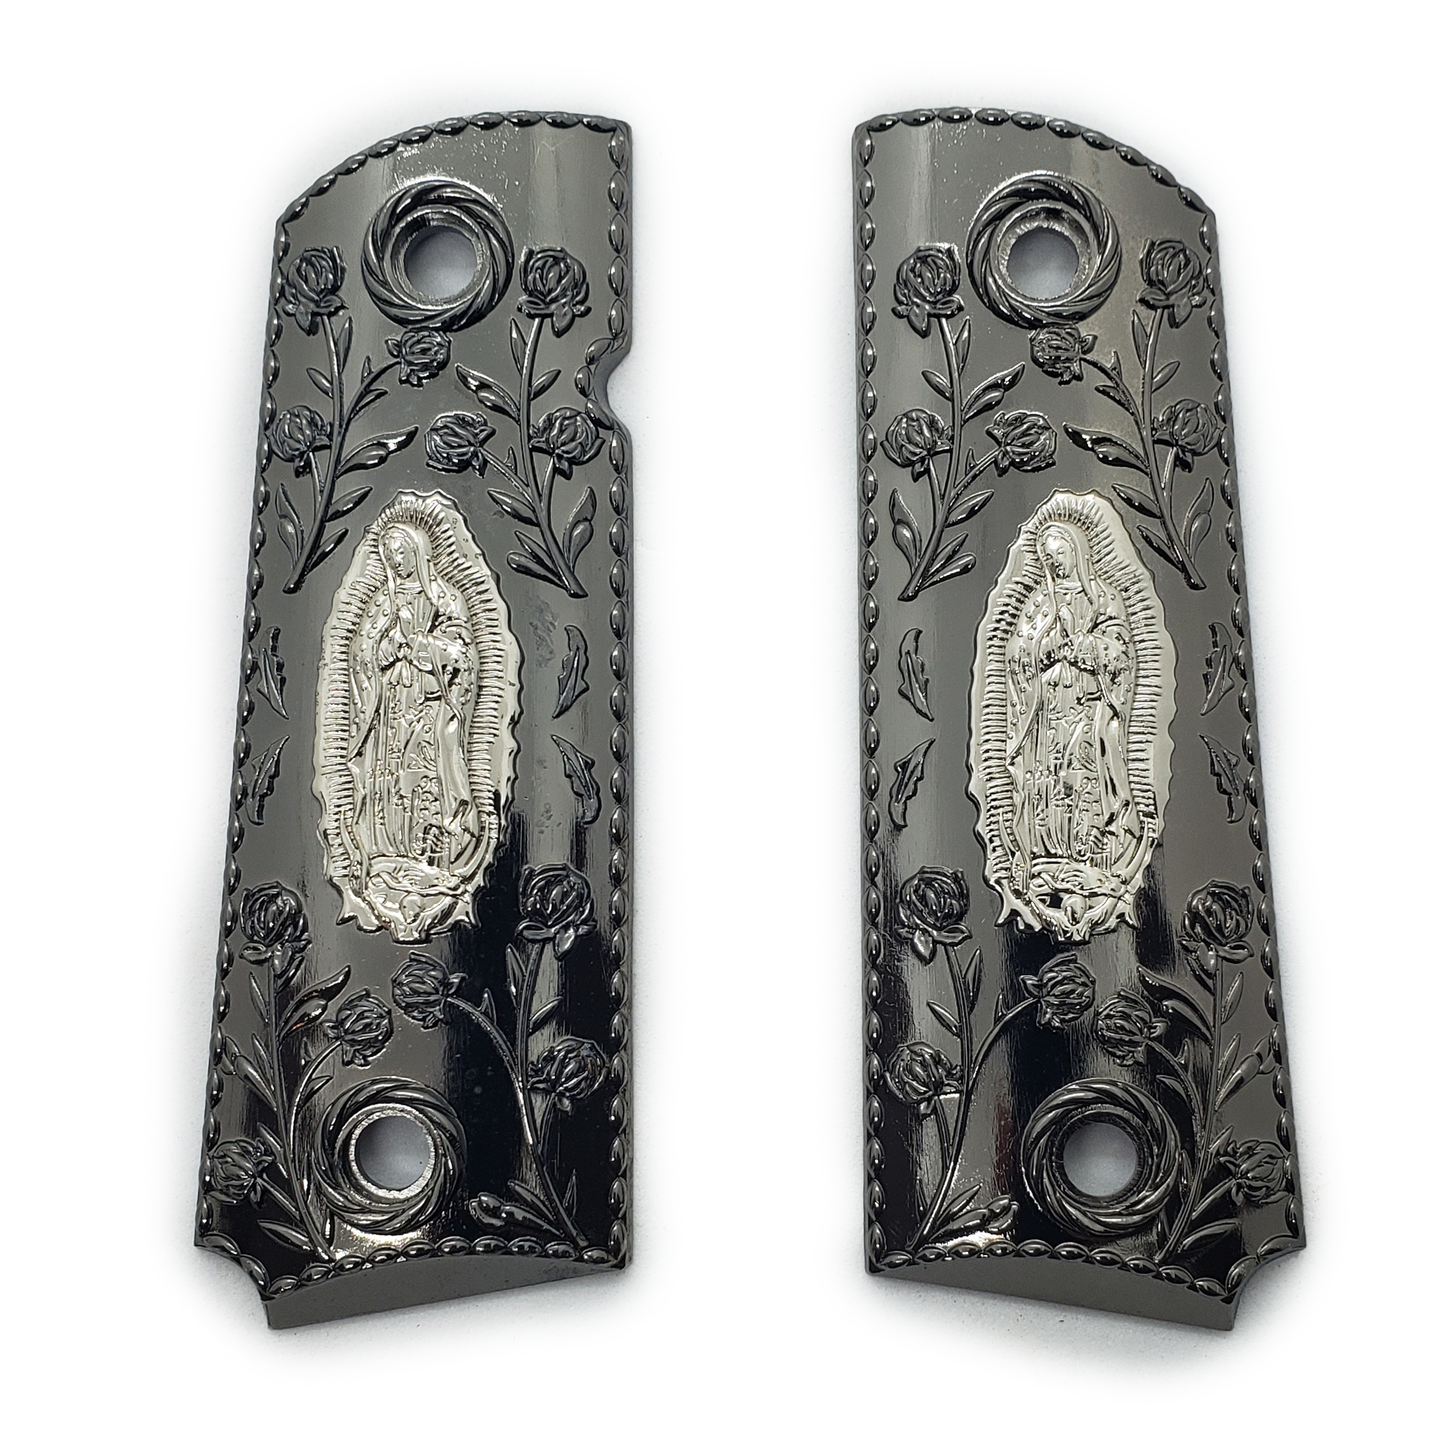 1911 GRIPS FULL SIZE - Metal - Virgin Mary Scroll W Ambi Safety #T-VM03